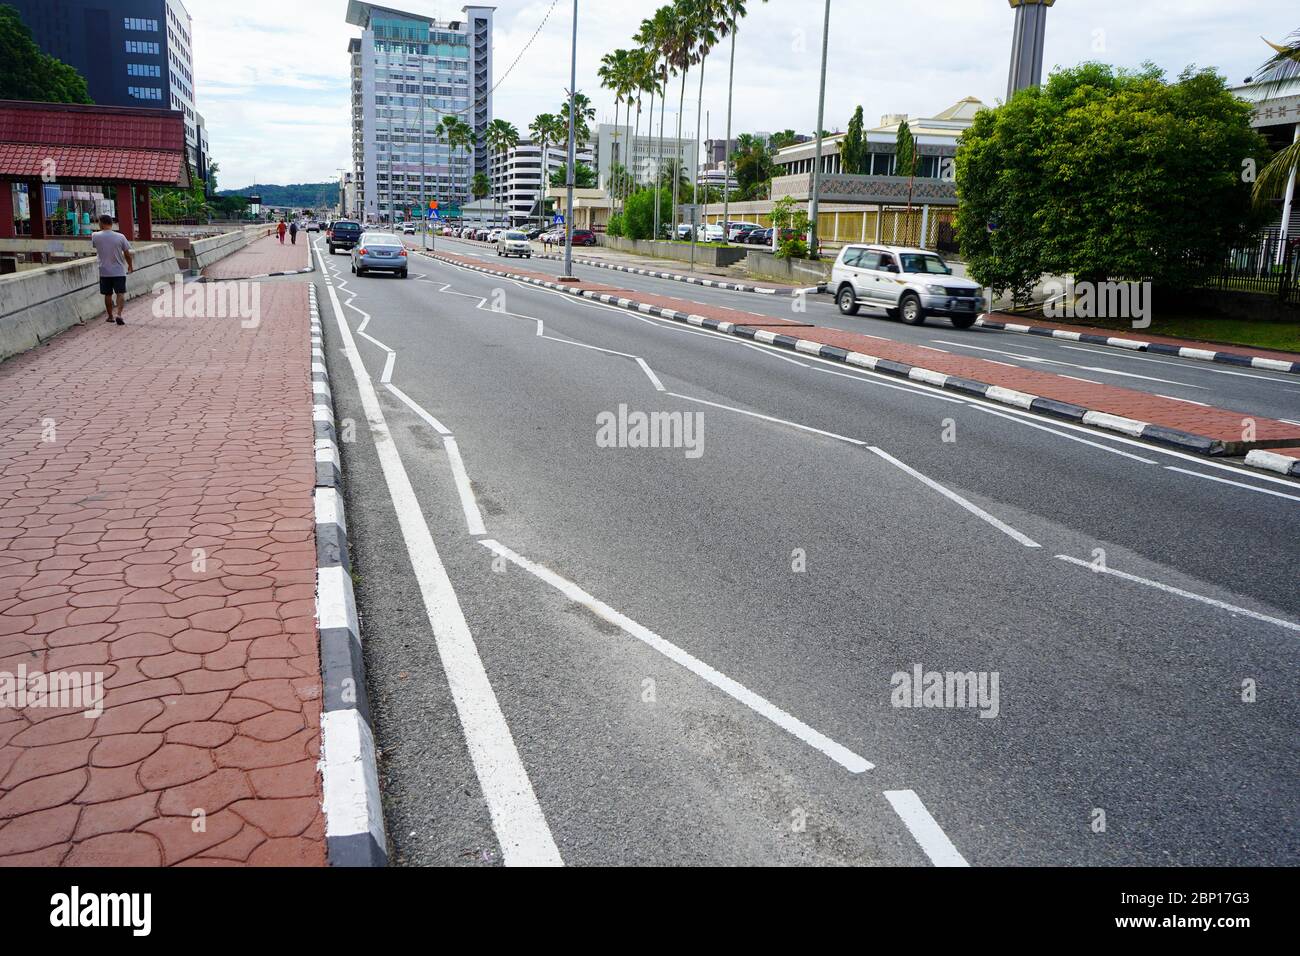 Sidewalk and road with marking in Bandar Seri Begawan, the capital of Brunei which is the small country on Borneo Stock Photo